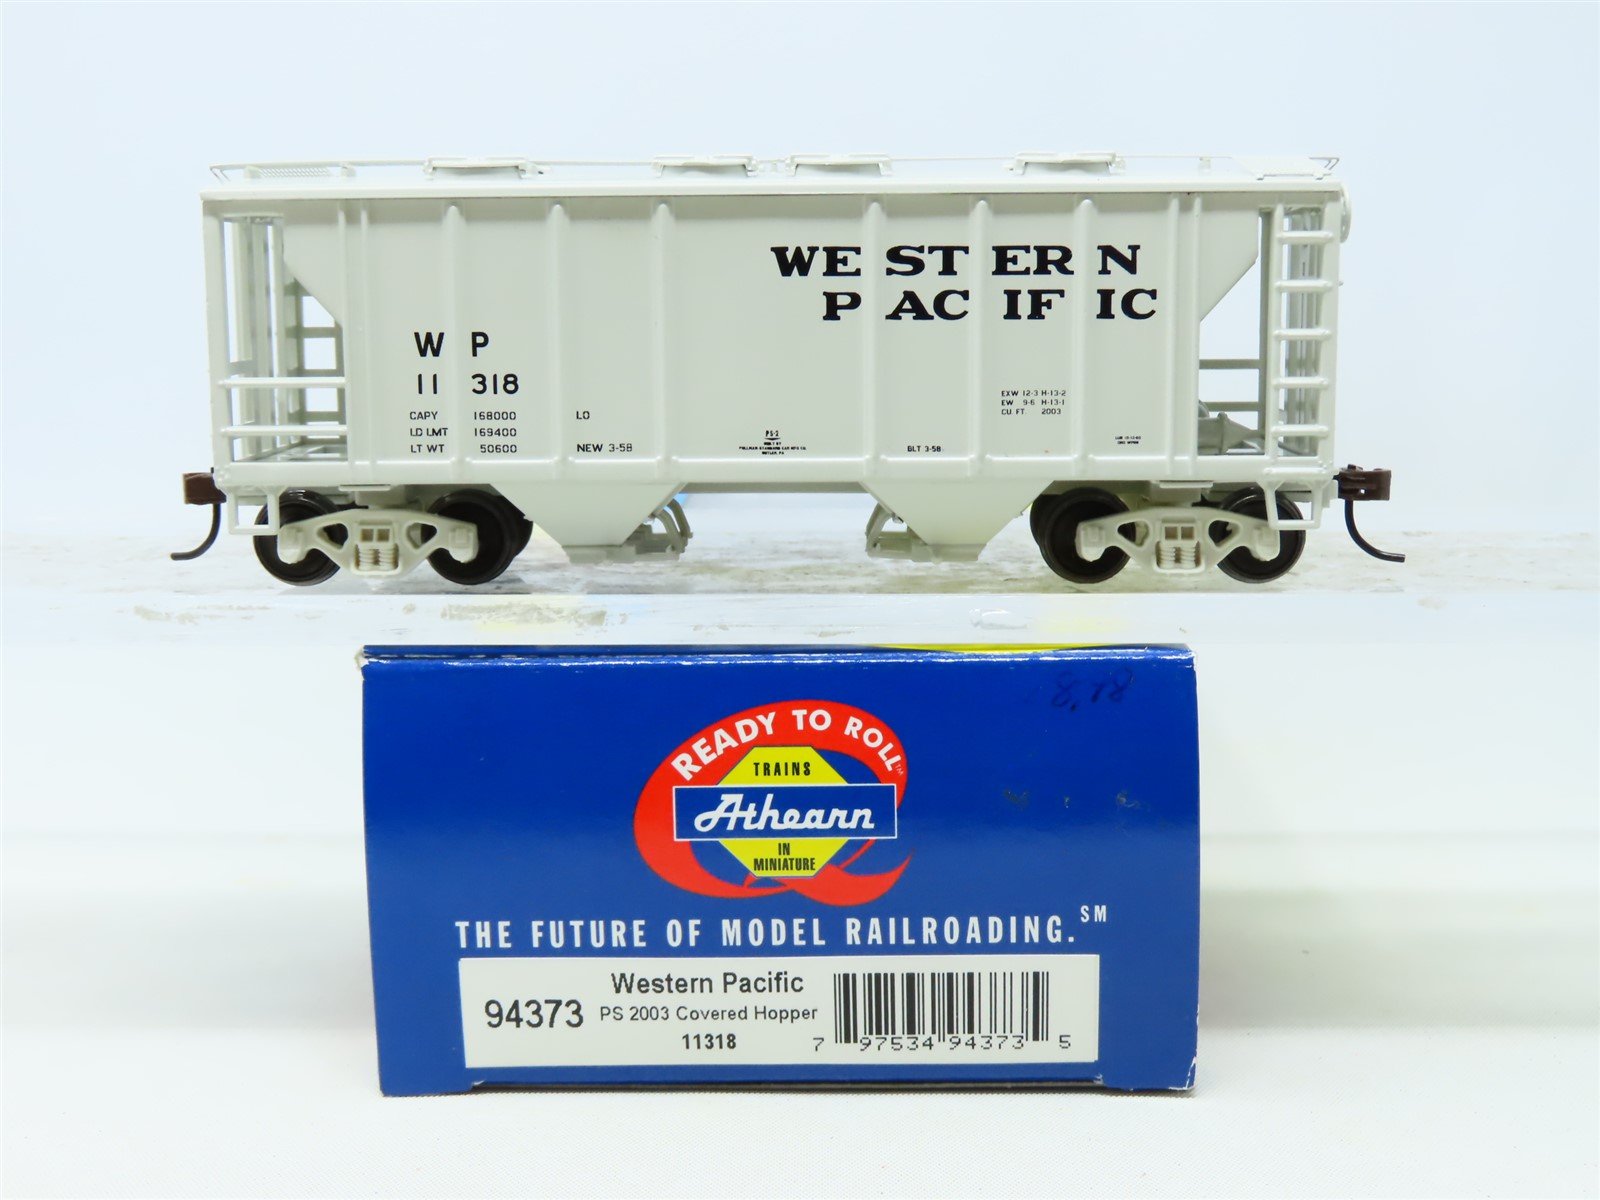 HO Scale Athearn 94373 WP Western Pacific 2-Bay Covered Hopper #11318